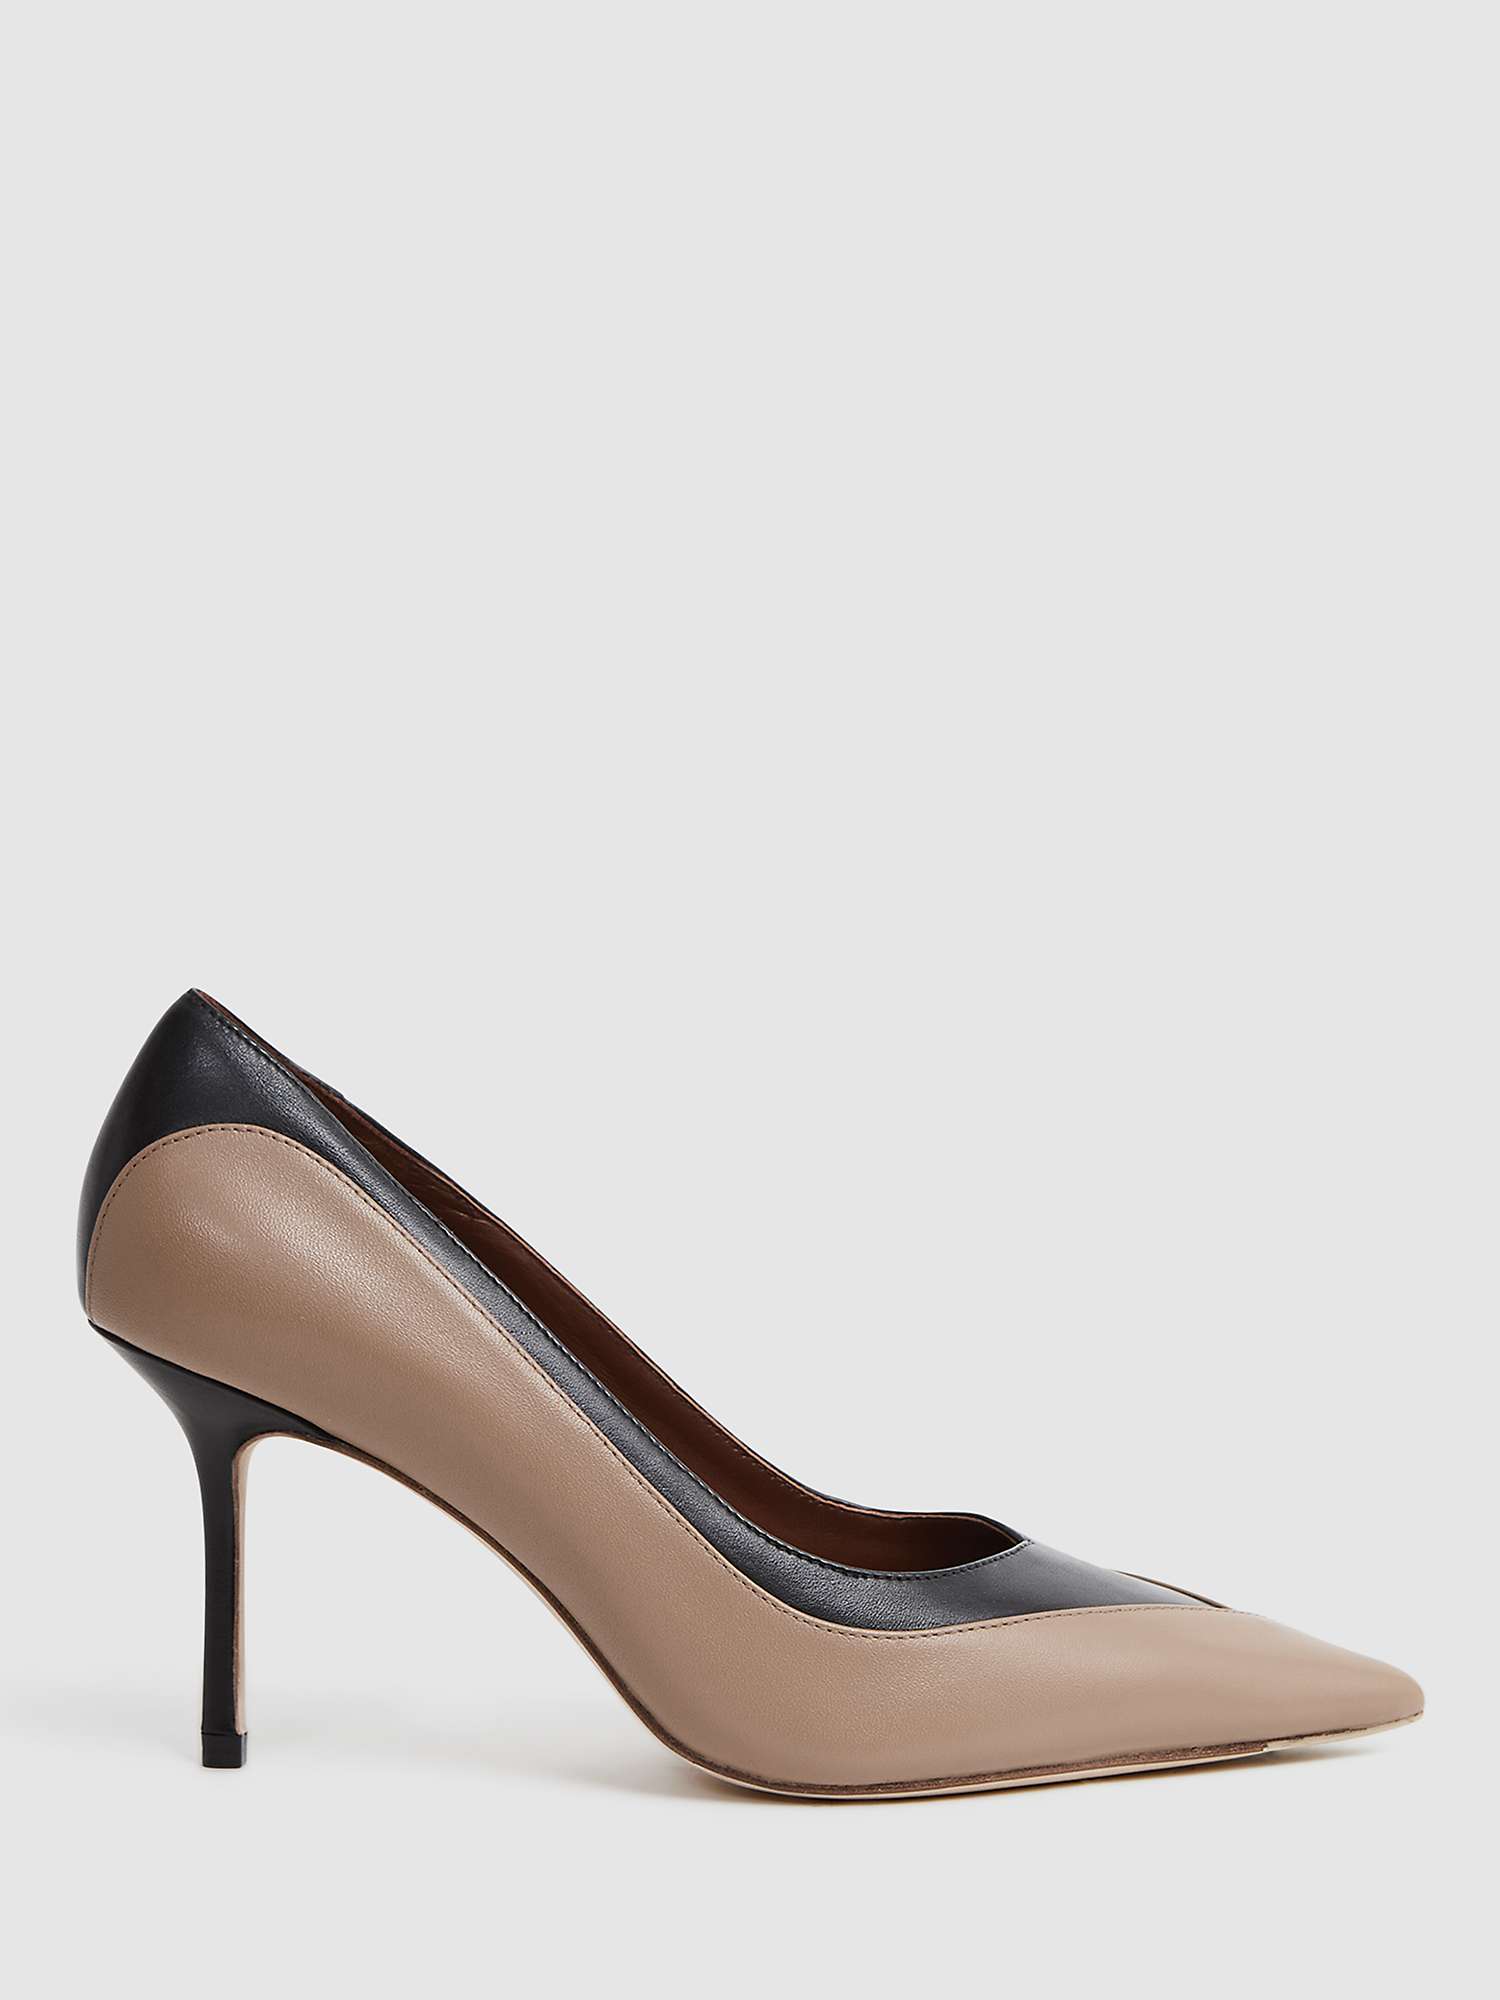 Buy Reiss Gwyneth High Heel Leather Court Shoes, Camel/Black Online at johnlewis.com